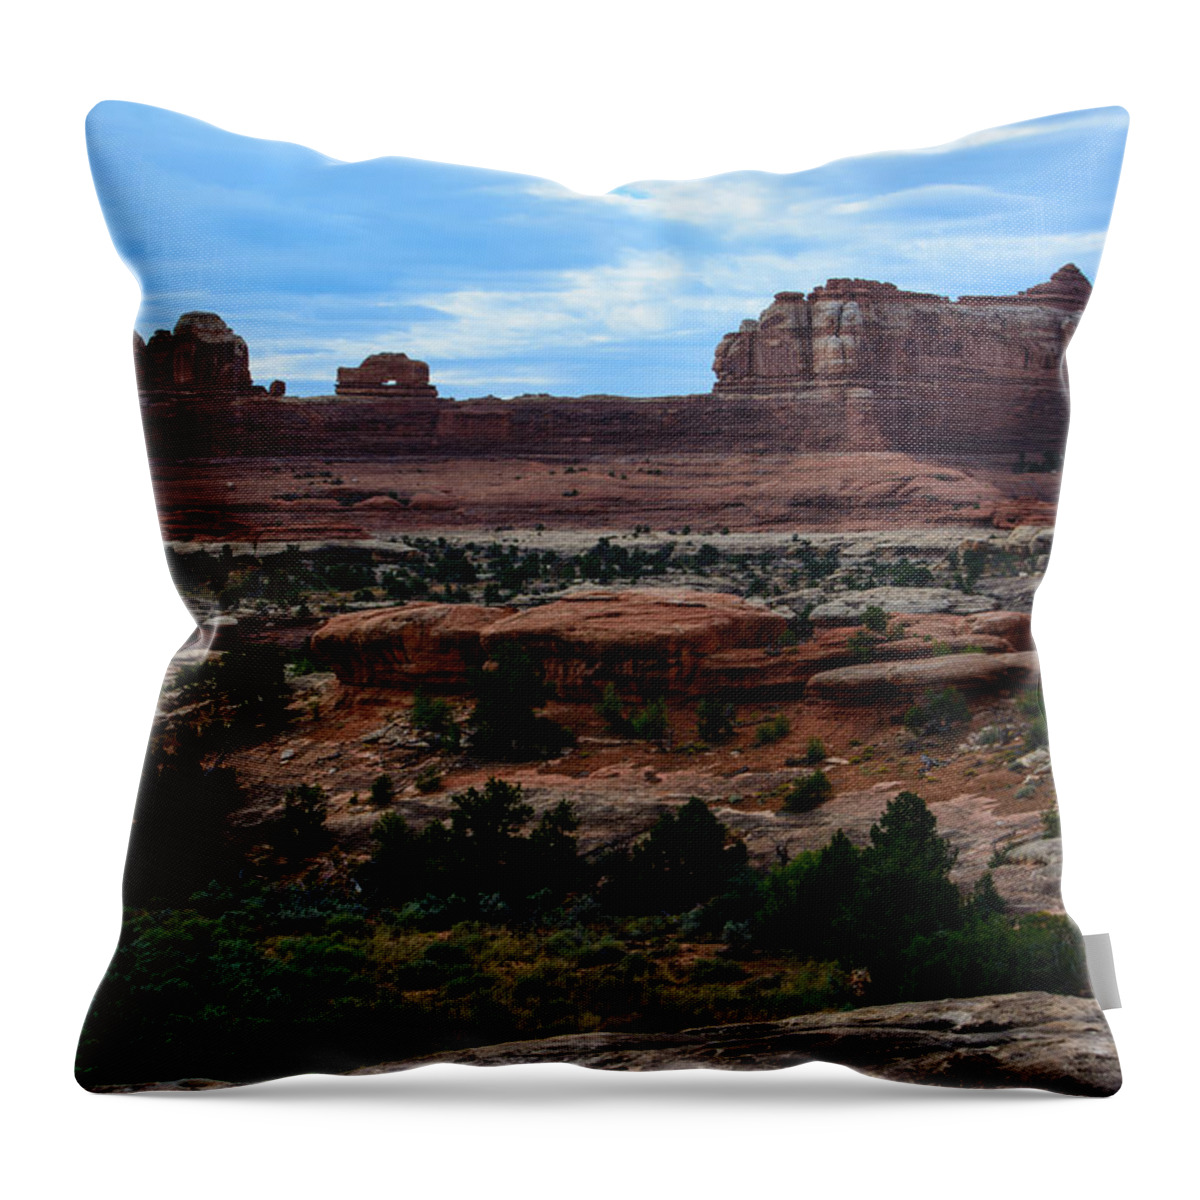 Landscape Throw Pillow featuring the photograph Wooden Shoe Arch by Tikvah's Hope